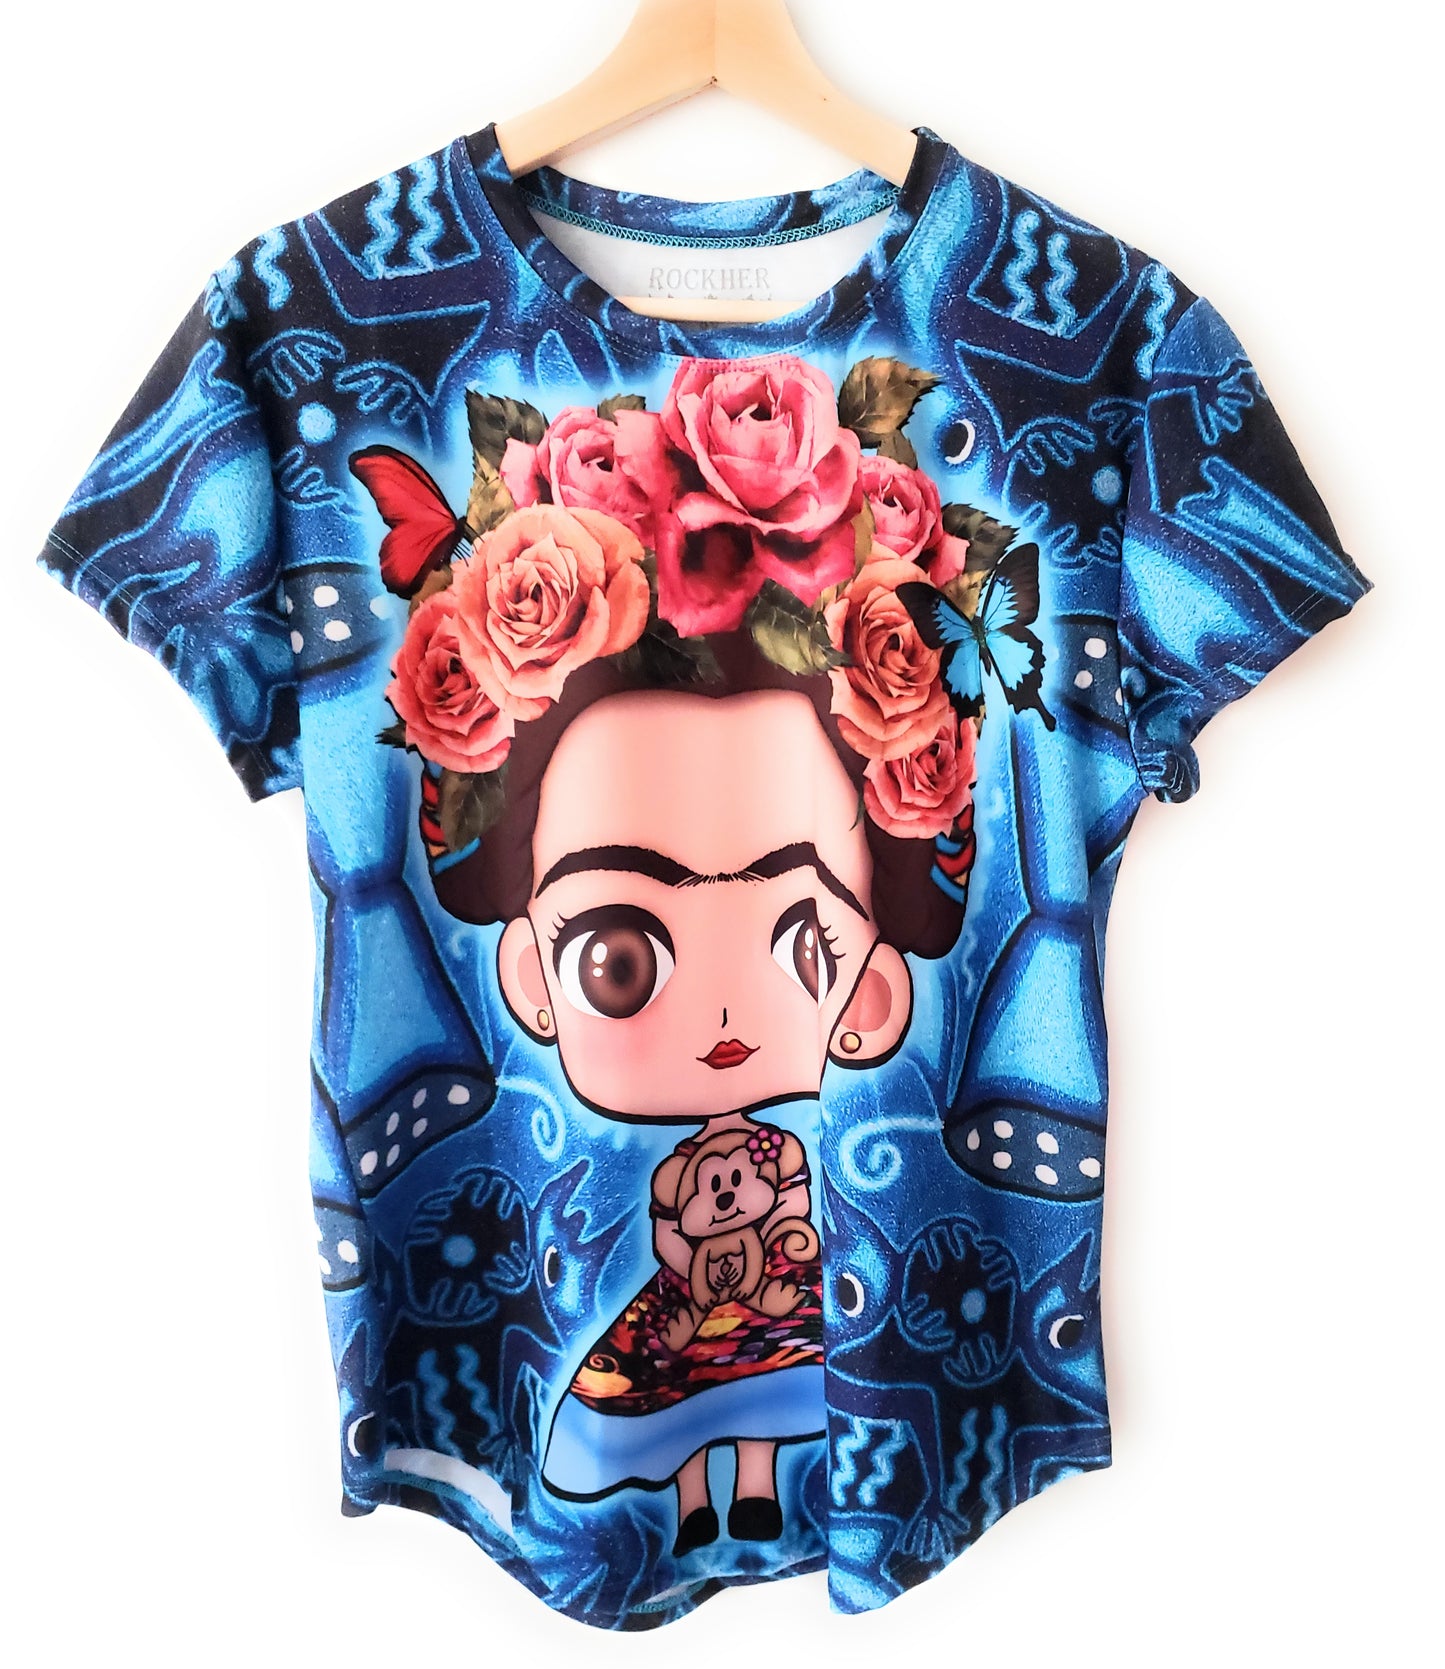 Frida Kahlo Full Print Blue Graphic Tee Floral Mexican T-Shirt